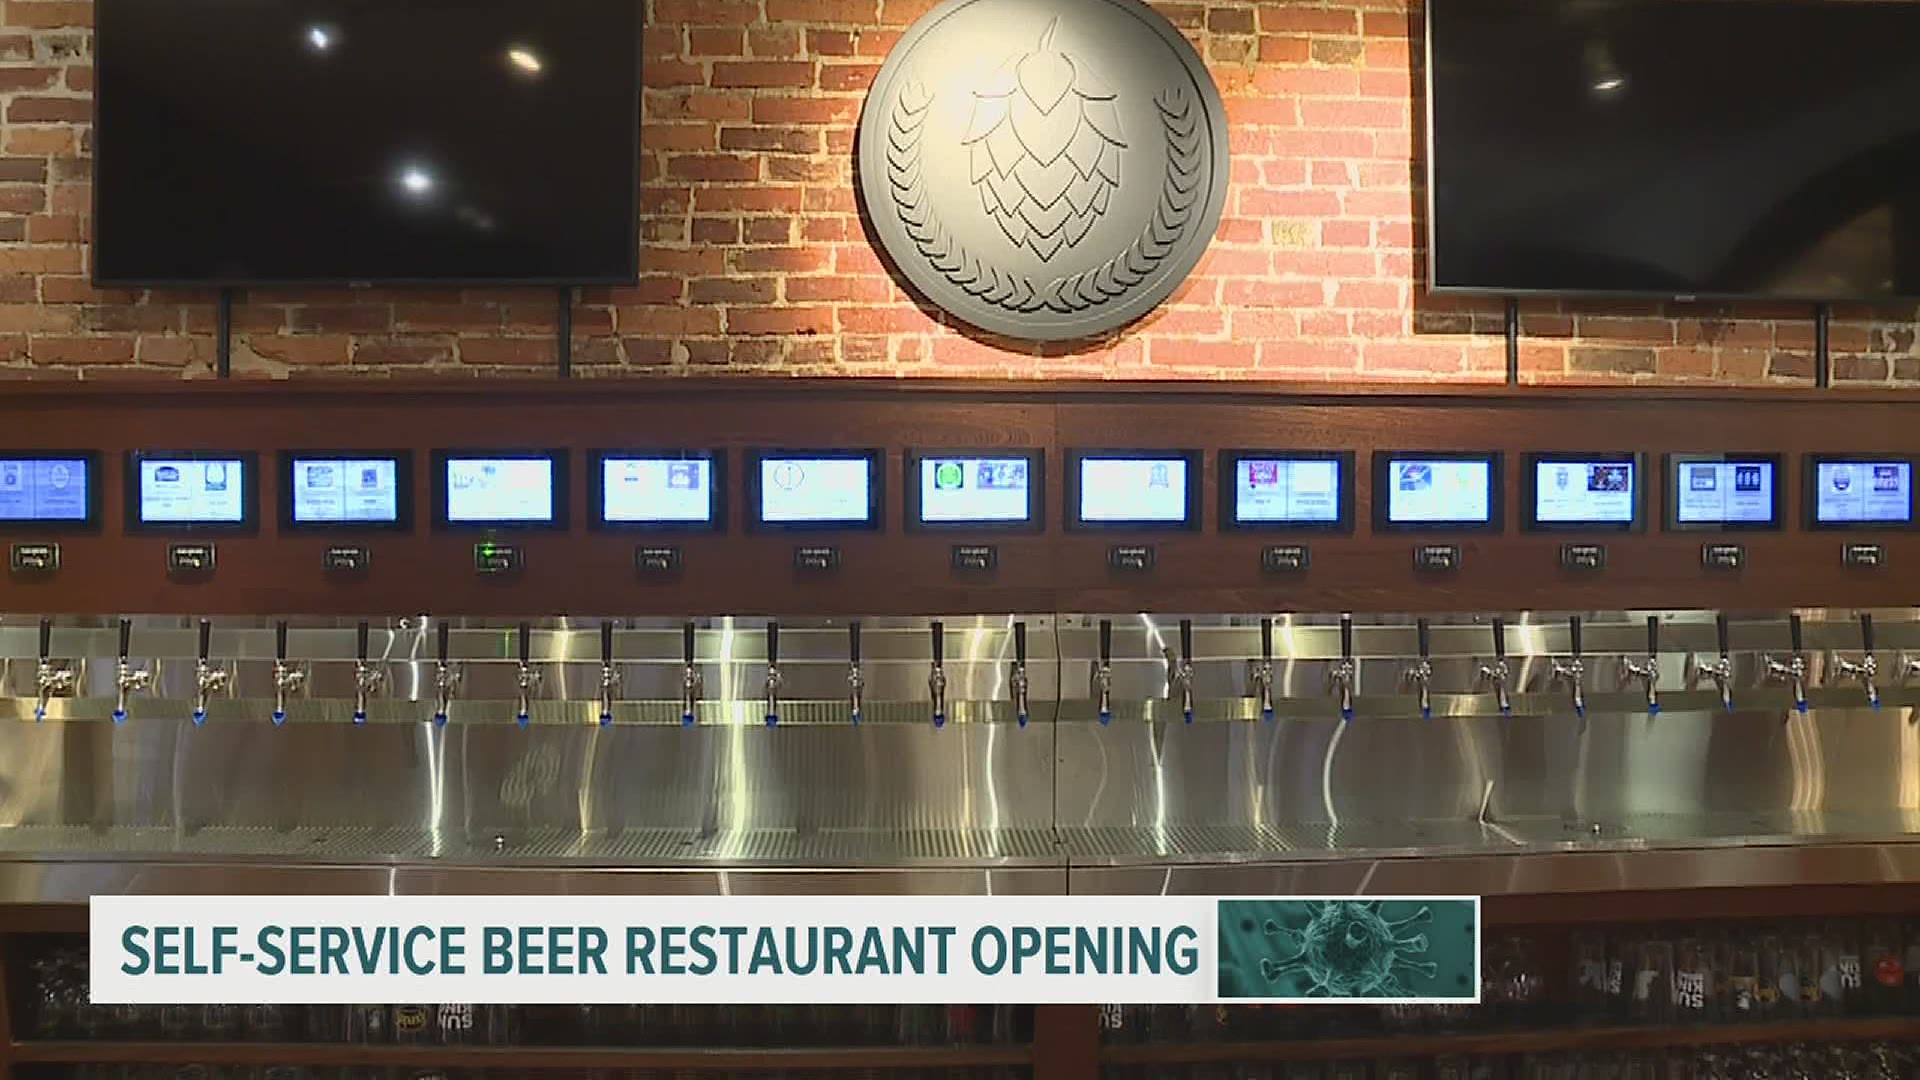 Beer Wall on Prince opens Tuesday in Lancaster. With 28 beers on tap, the owners say people can pour to their delight.